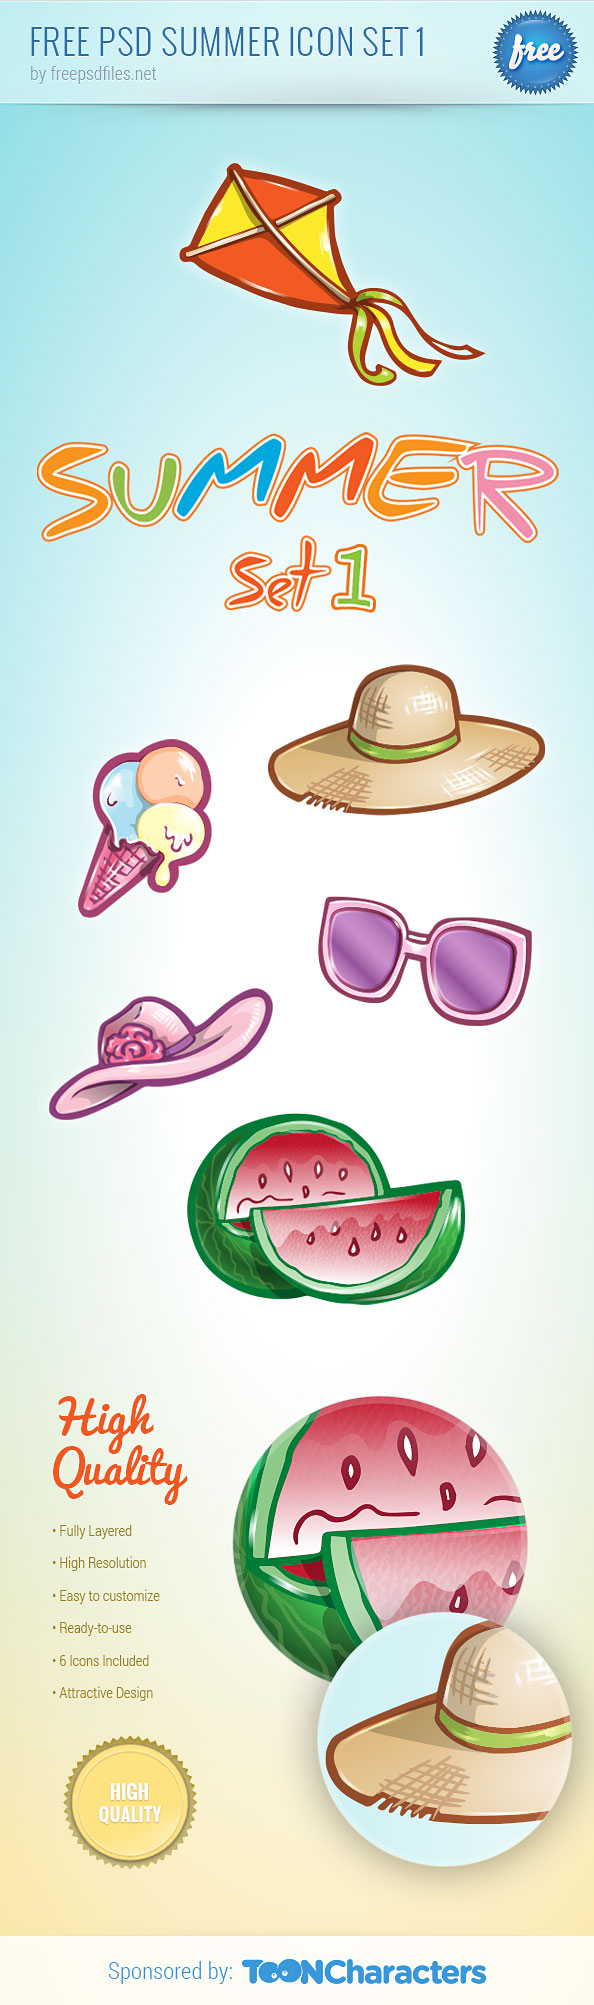 Free PSD Summer Icon Set Preview